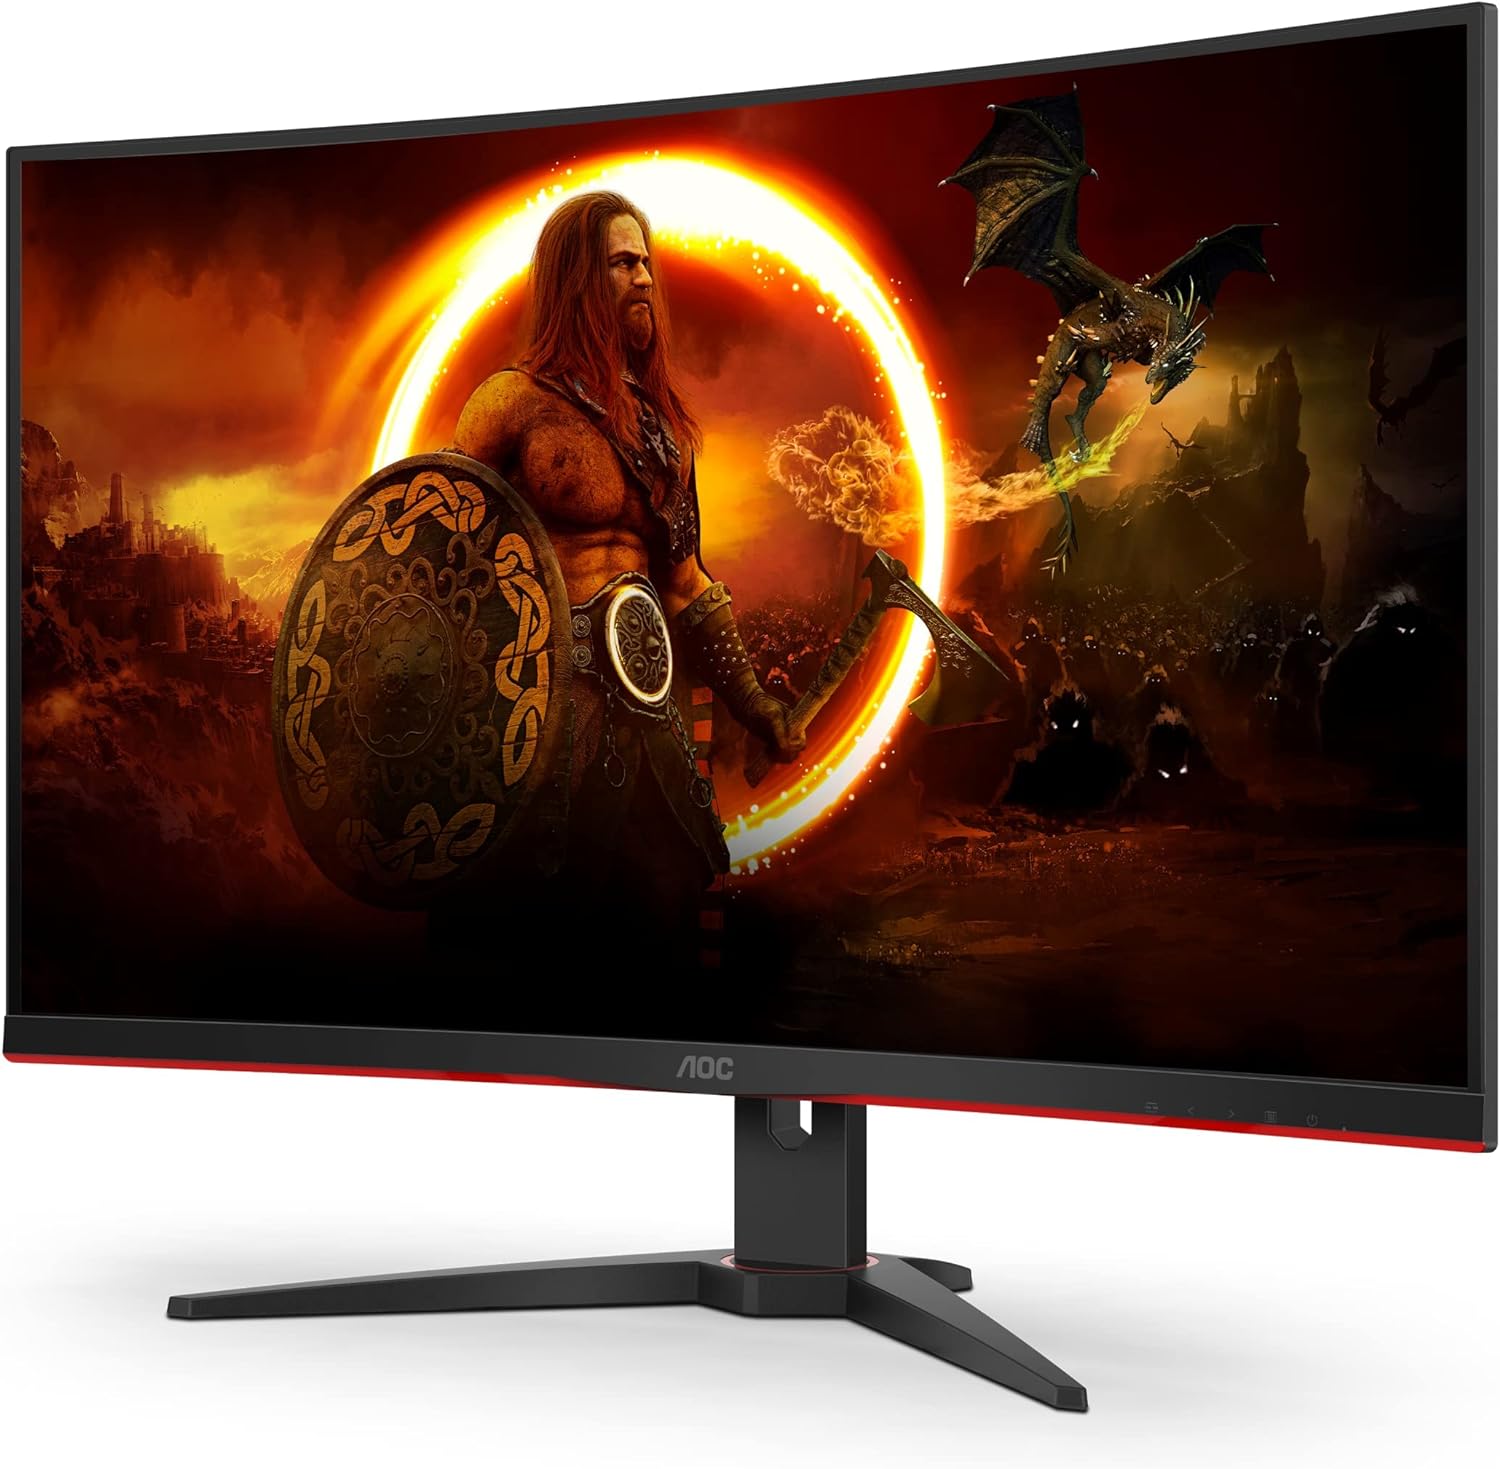 Super Rapid 0.5ms SmartResponse Time, 240Hz Refresh Rate - Stay Ahead in Gaming 0685417724185